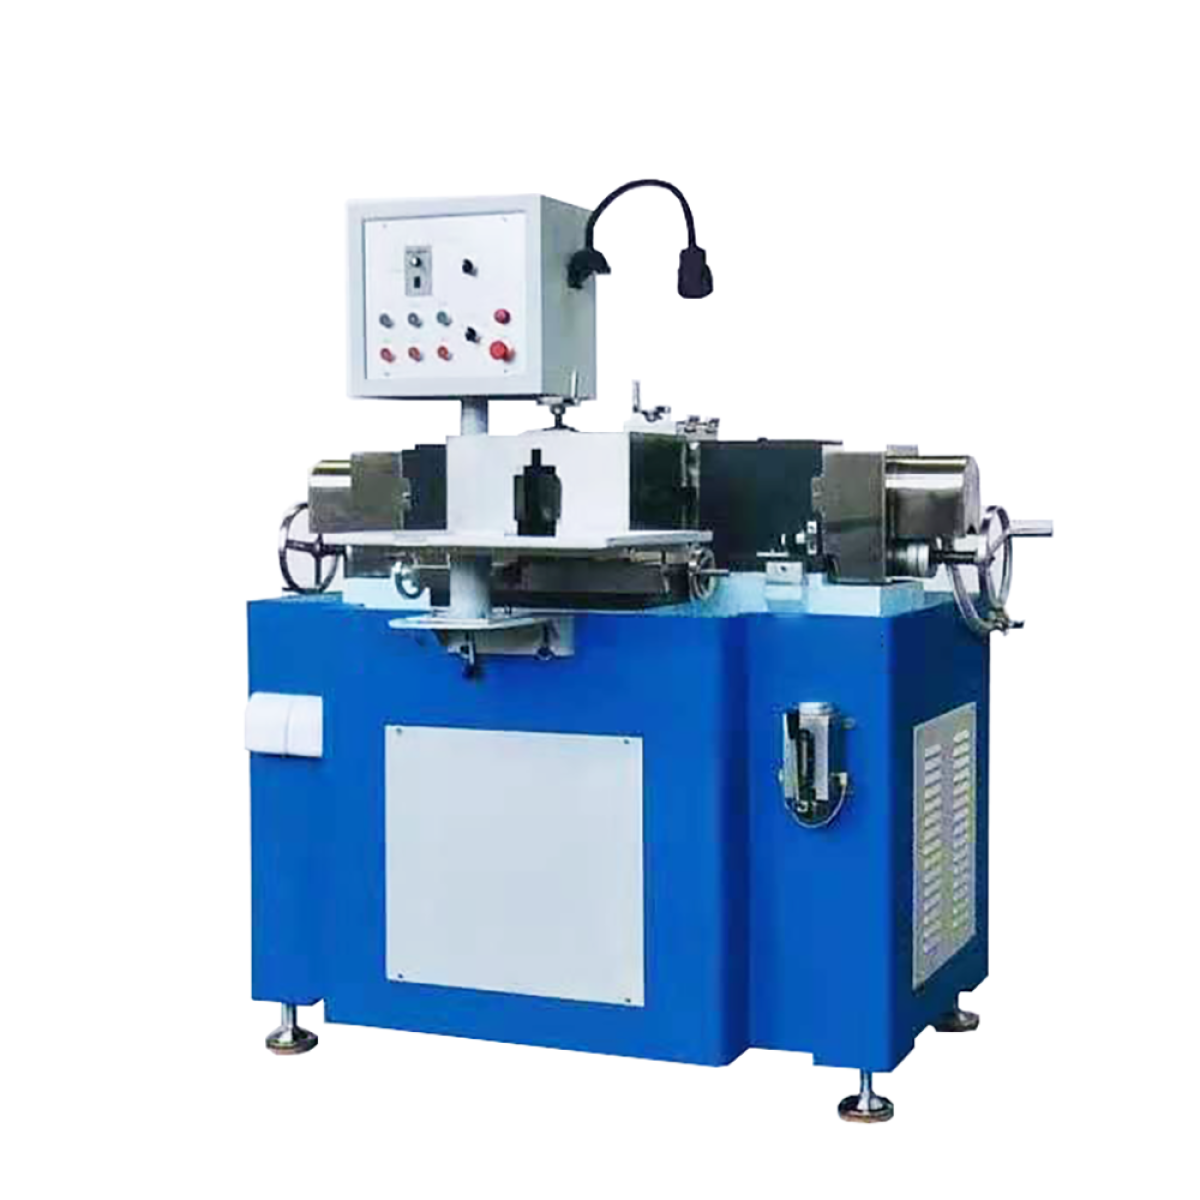 Double end face grinding machine